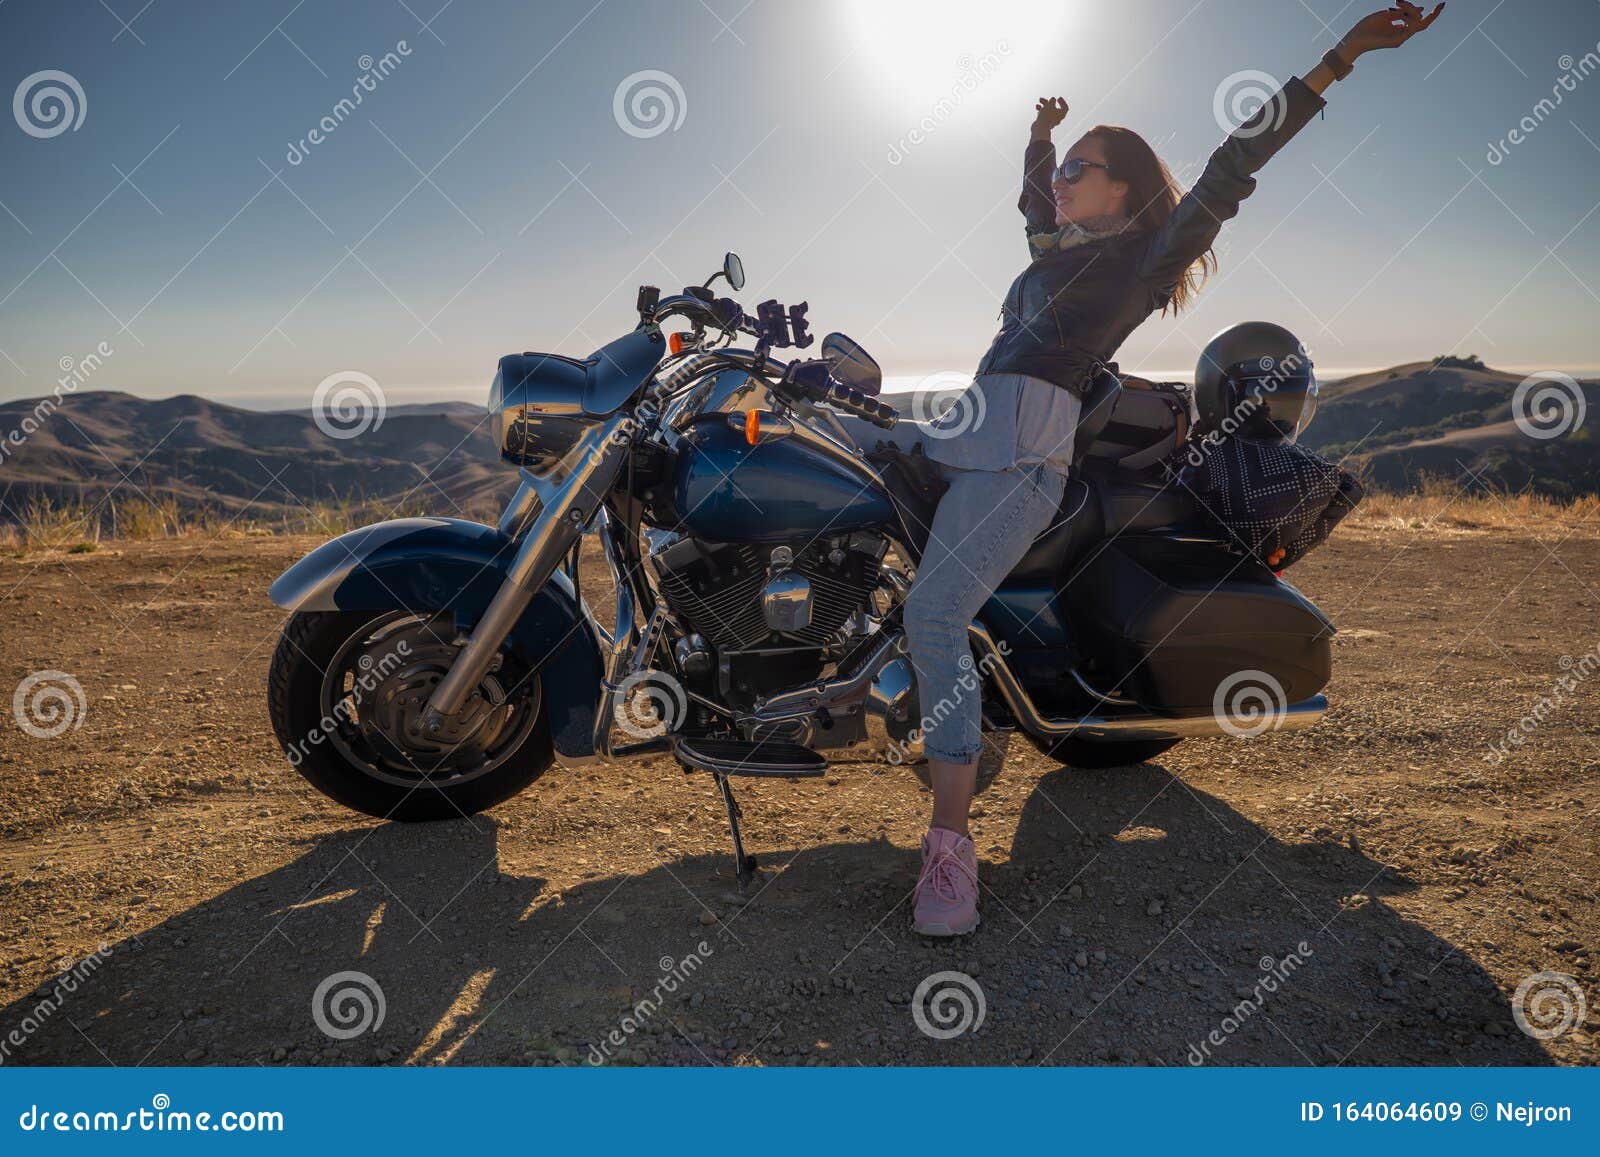 Woman Biker Sitting On Her Motorcycle Stock Image Image Of Lifestyle